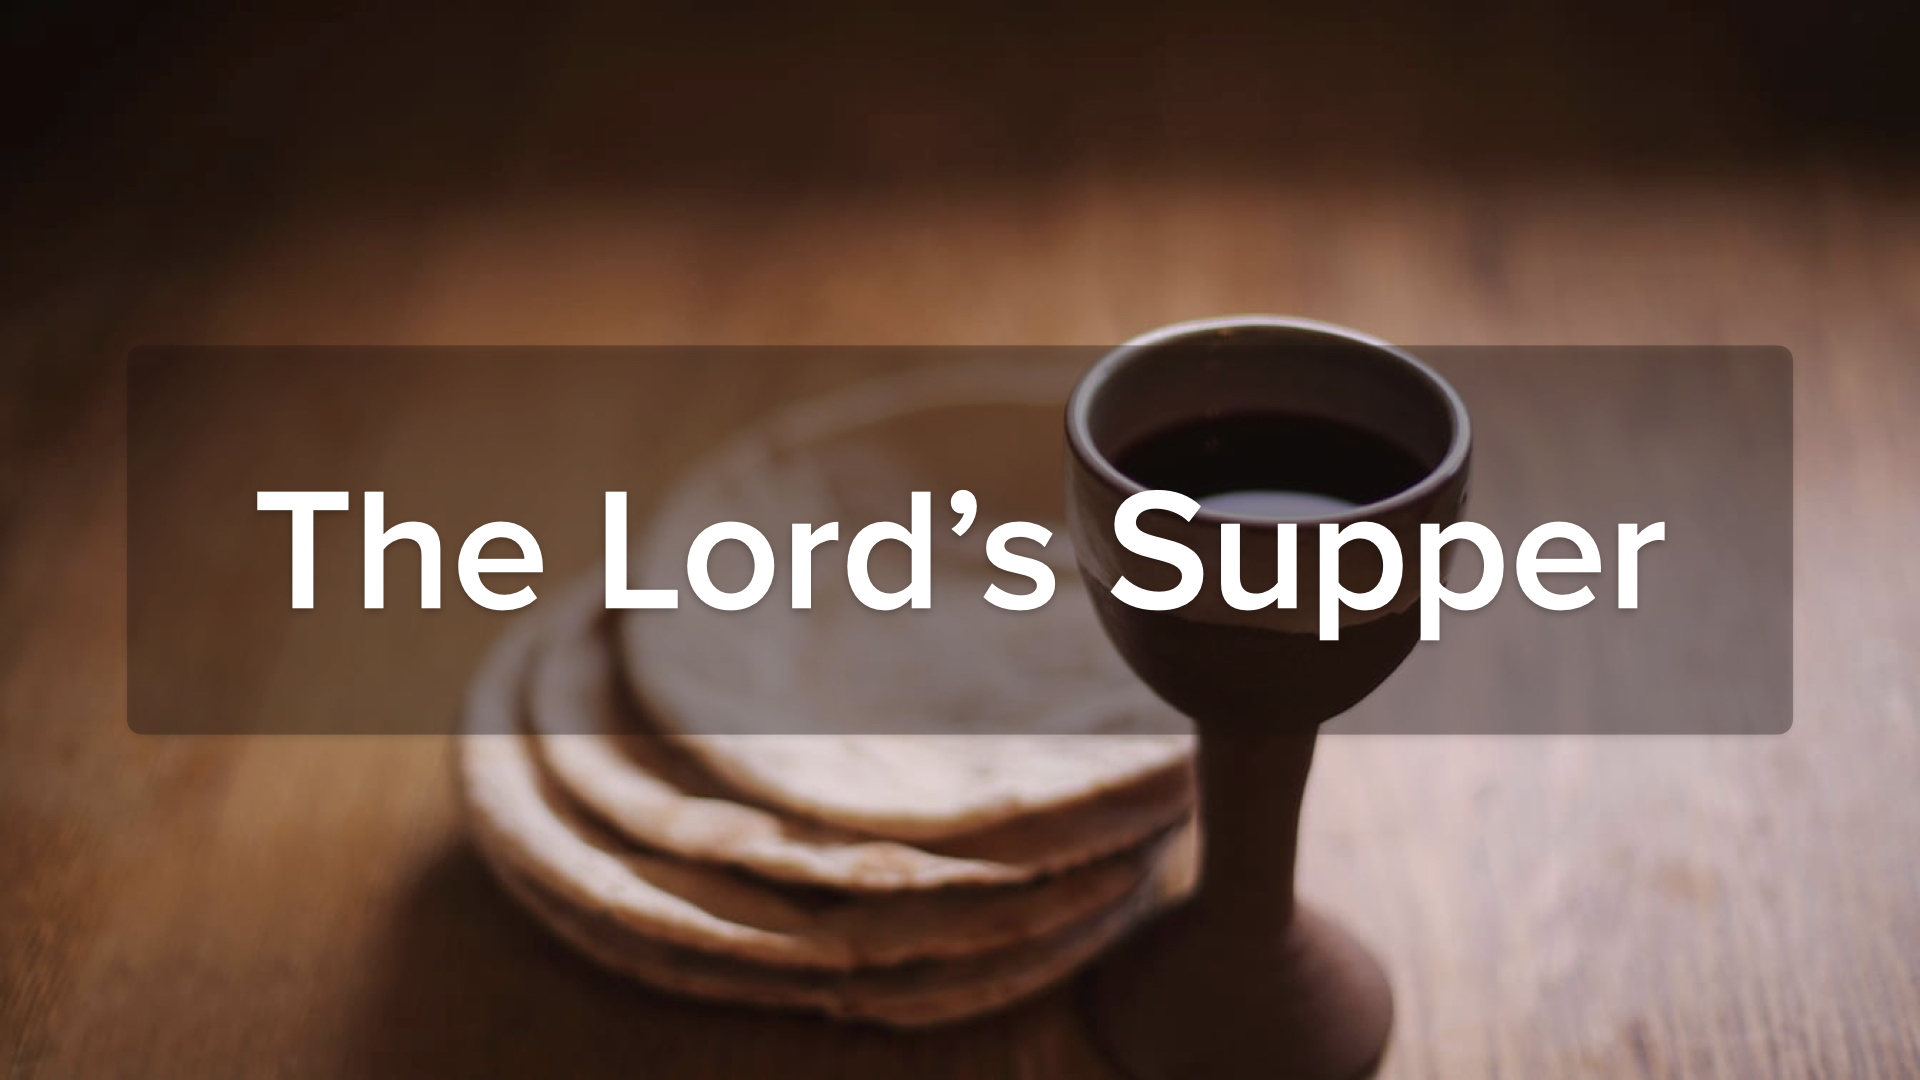 At the Table, the Depth of the Lord's Supper